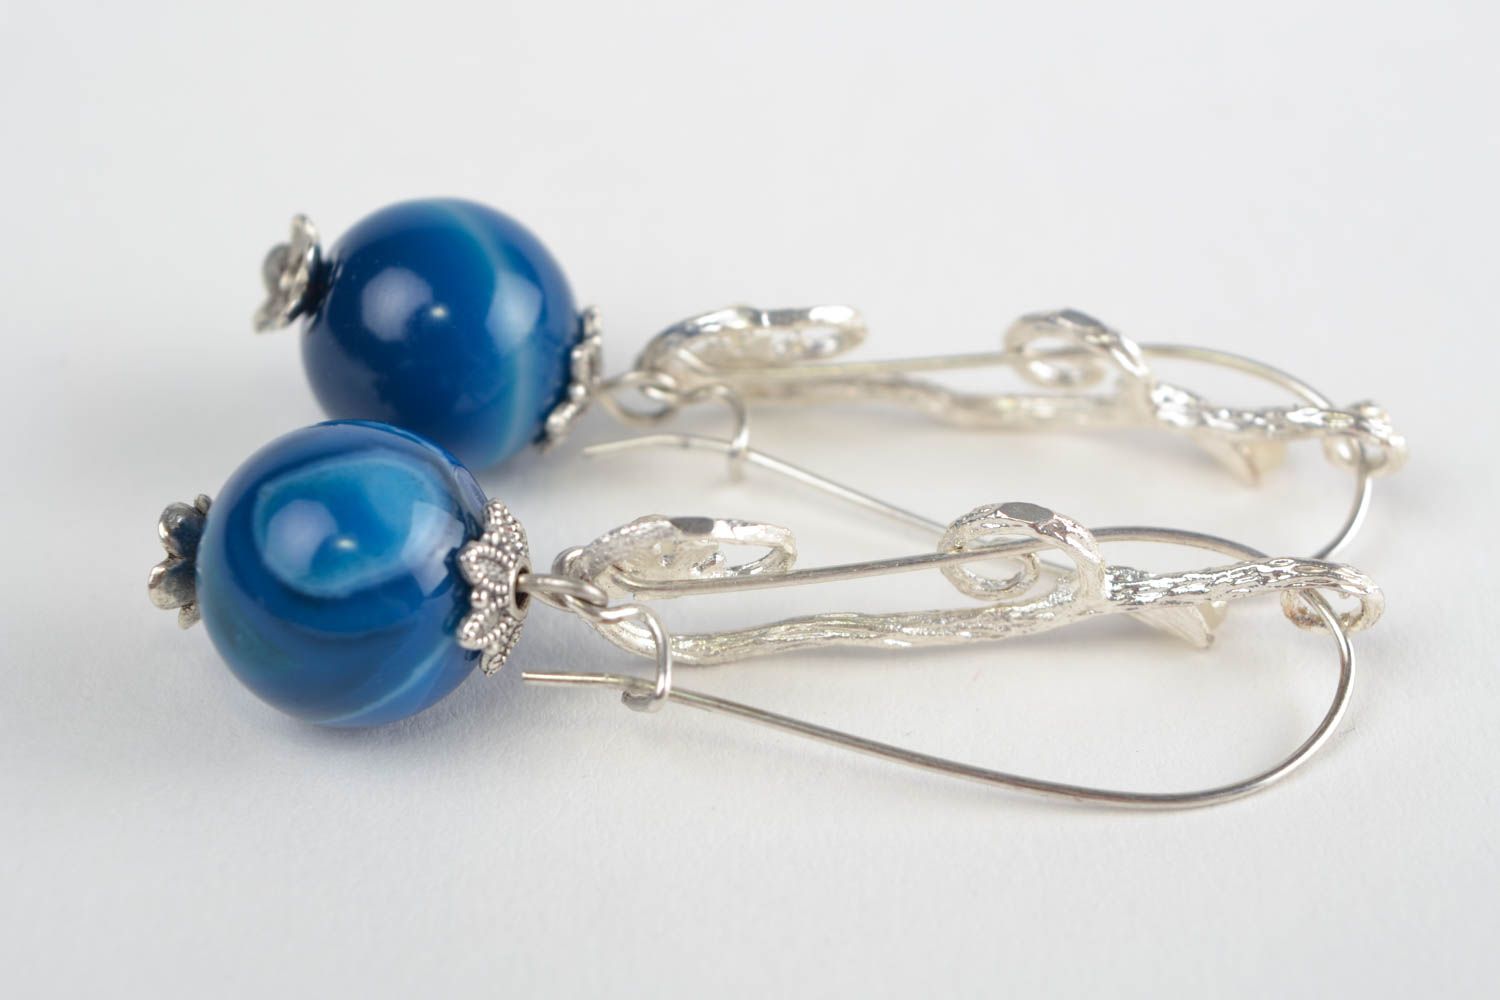 Handmade dangling earrings with silver colored fittings and blue agate beads photo 3